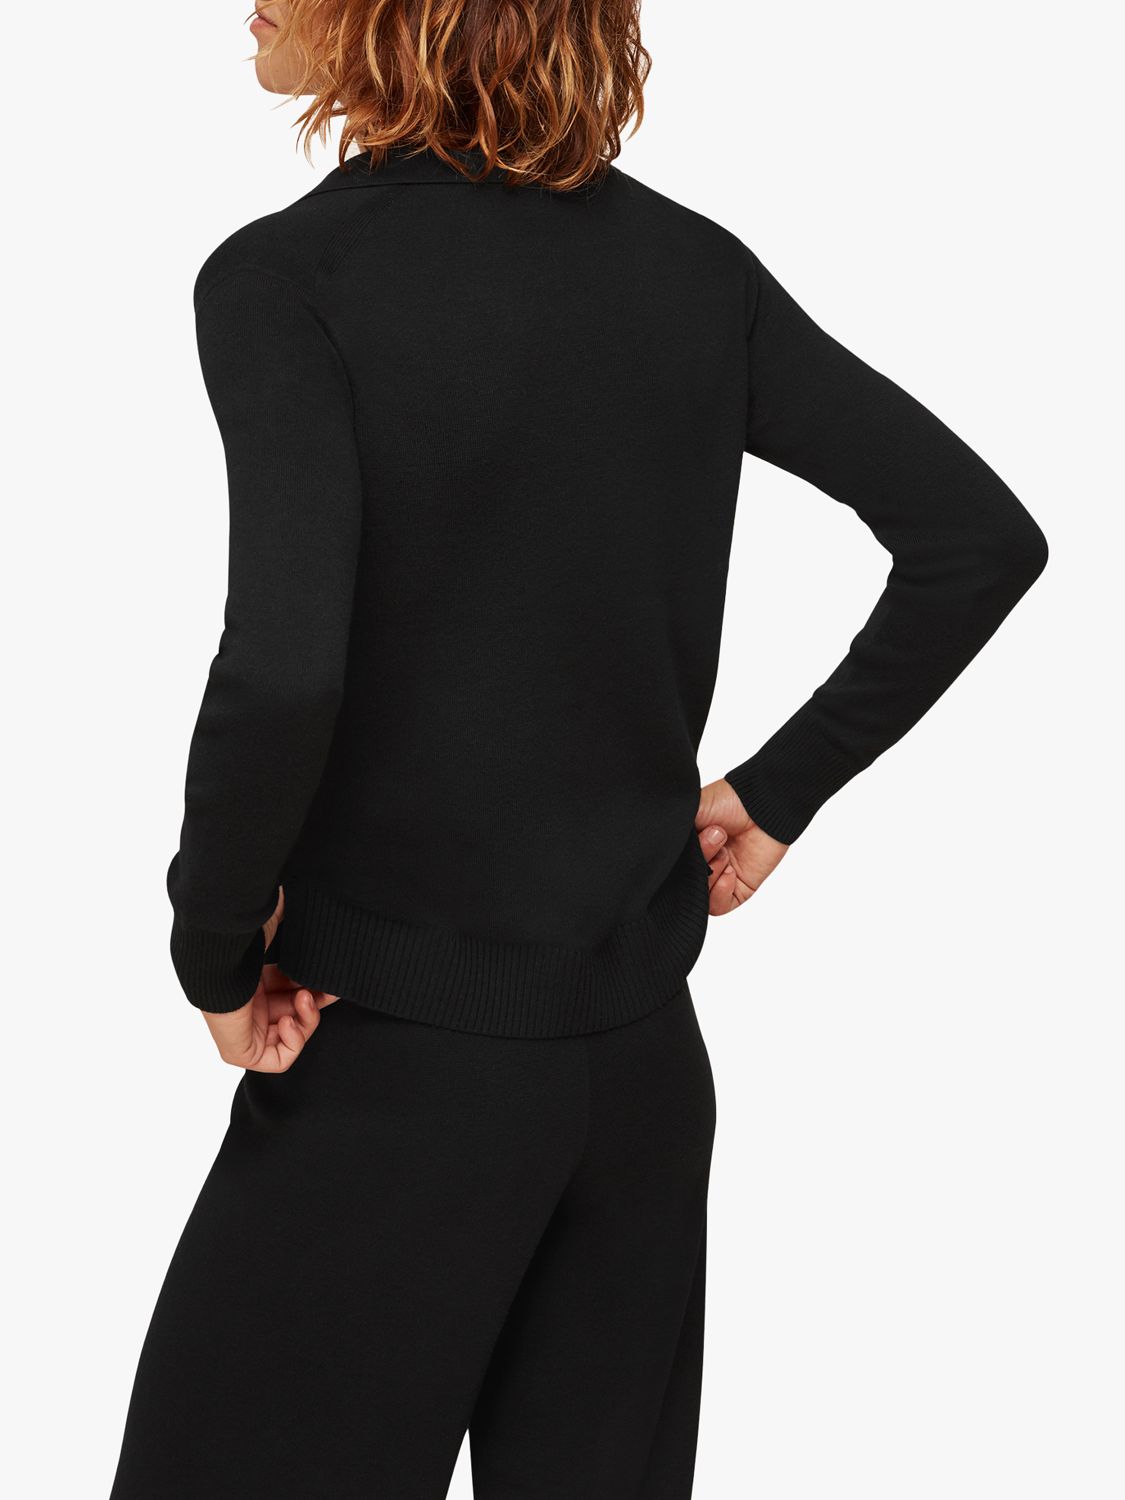 Whistles Knitted Polo Shirt, Black at John Lewis & Partners